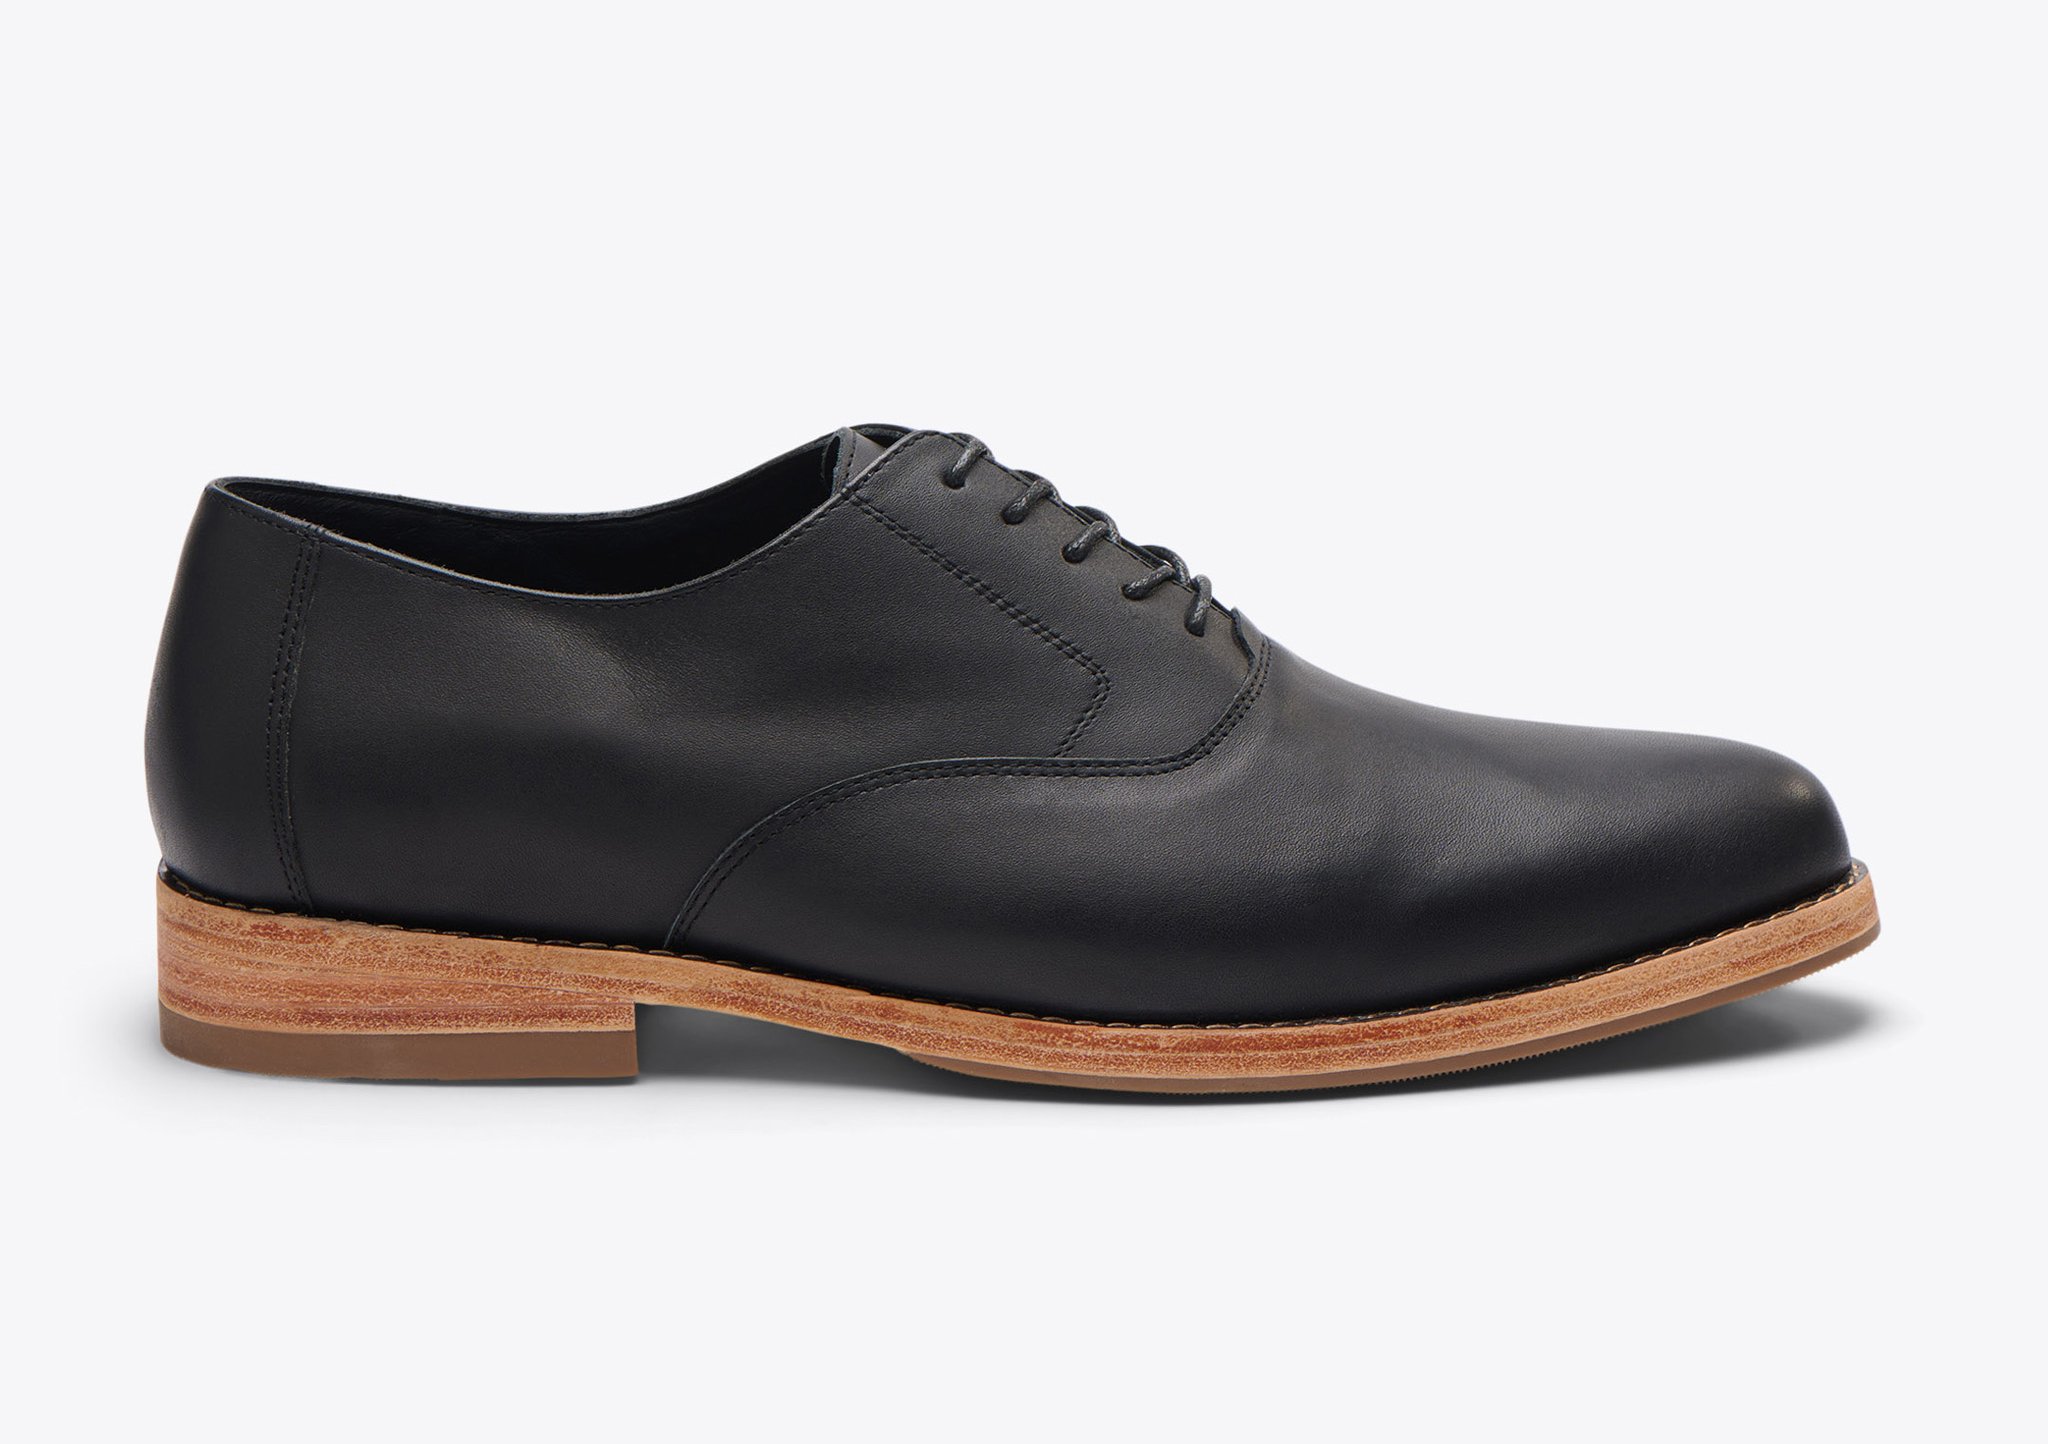 Nisolo Everyday Oxford Black - Every Nisolo product is built on the foundation of comfort, function, and design. 